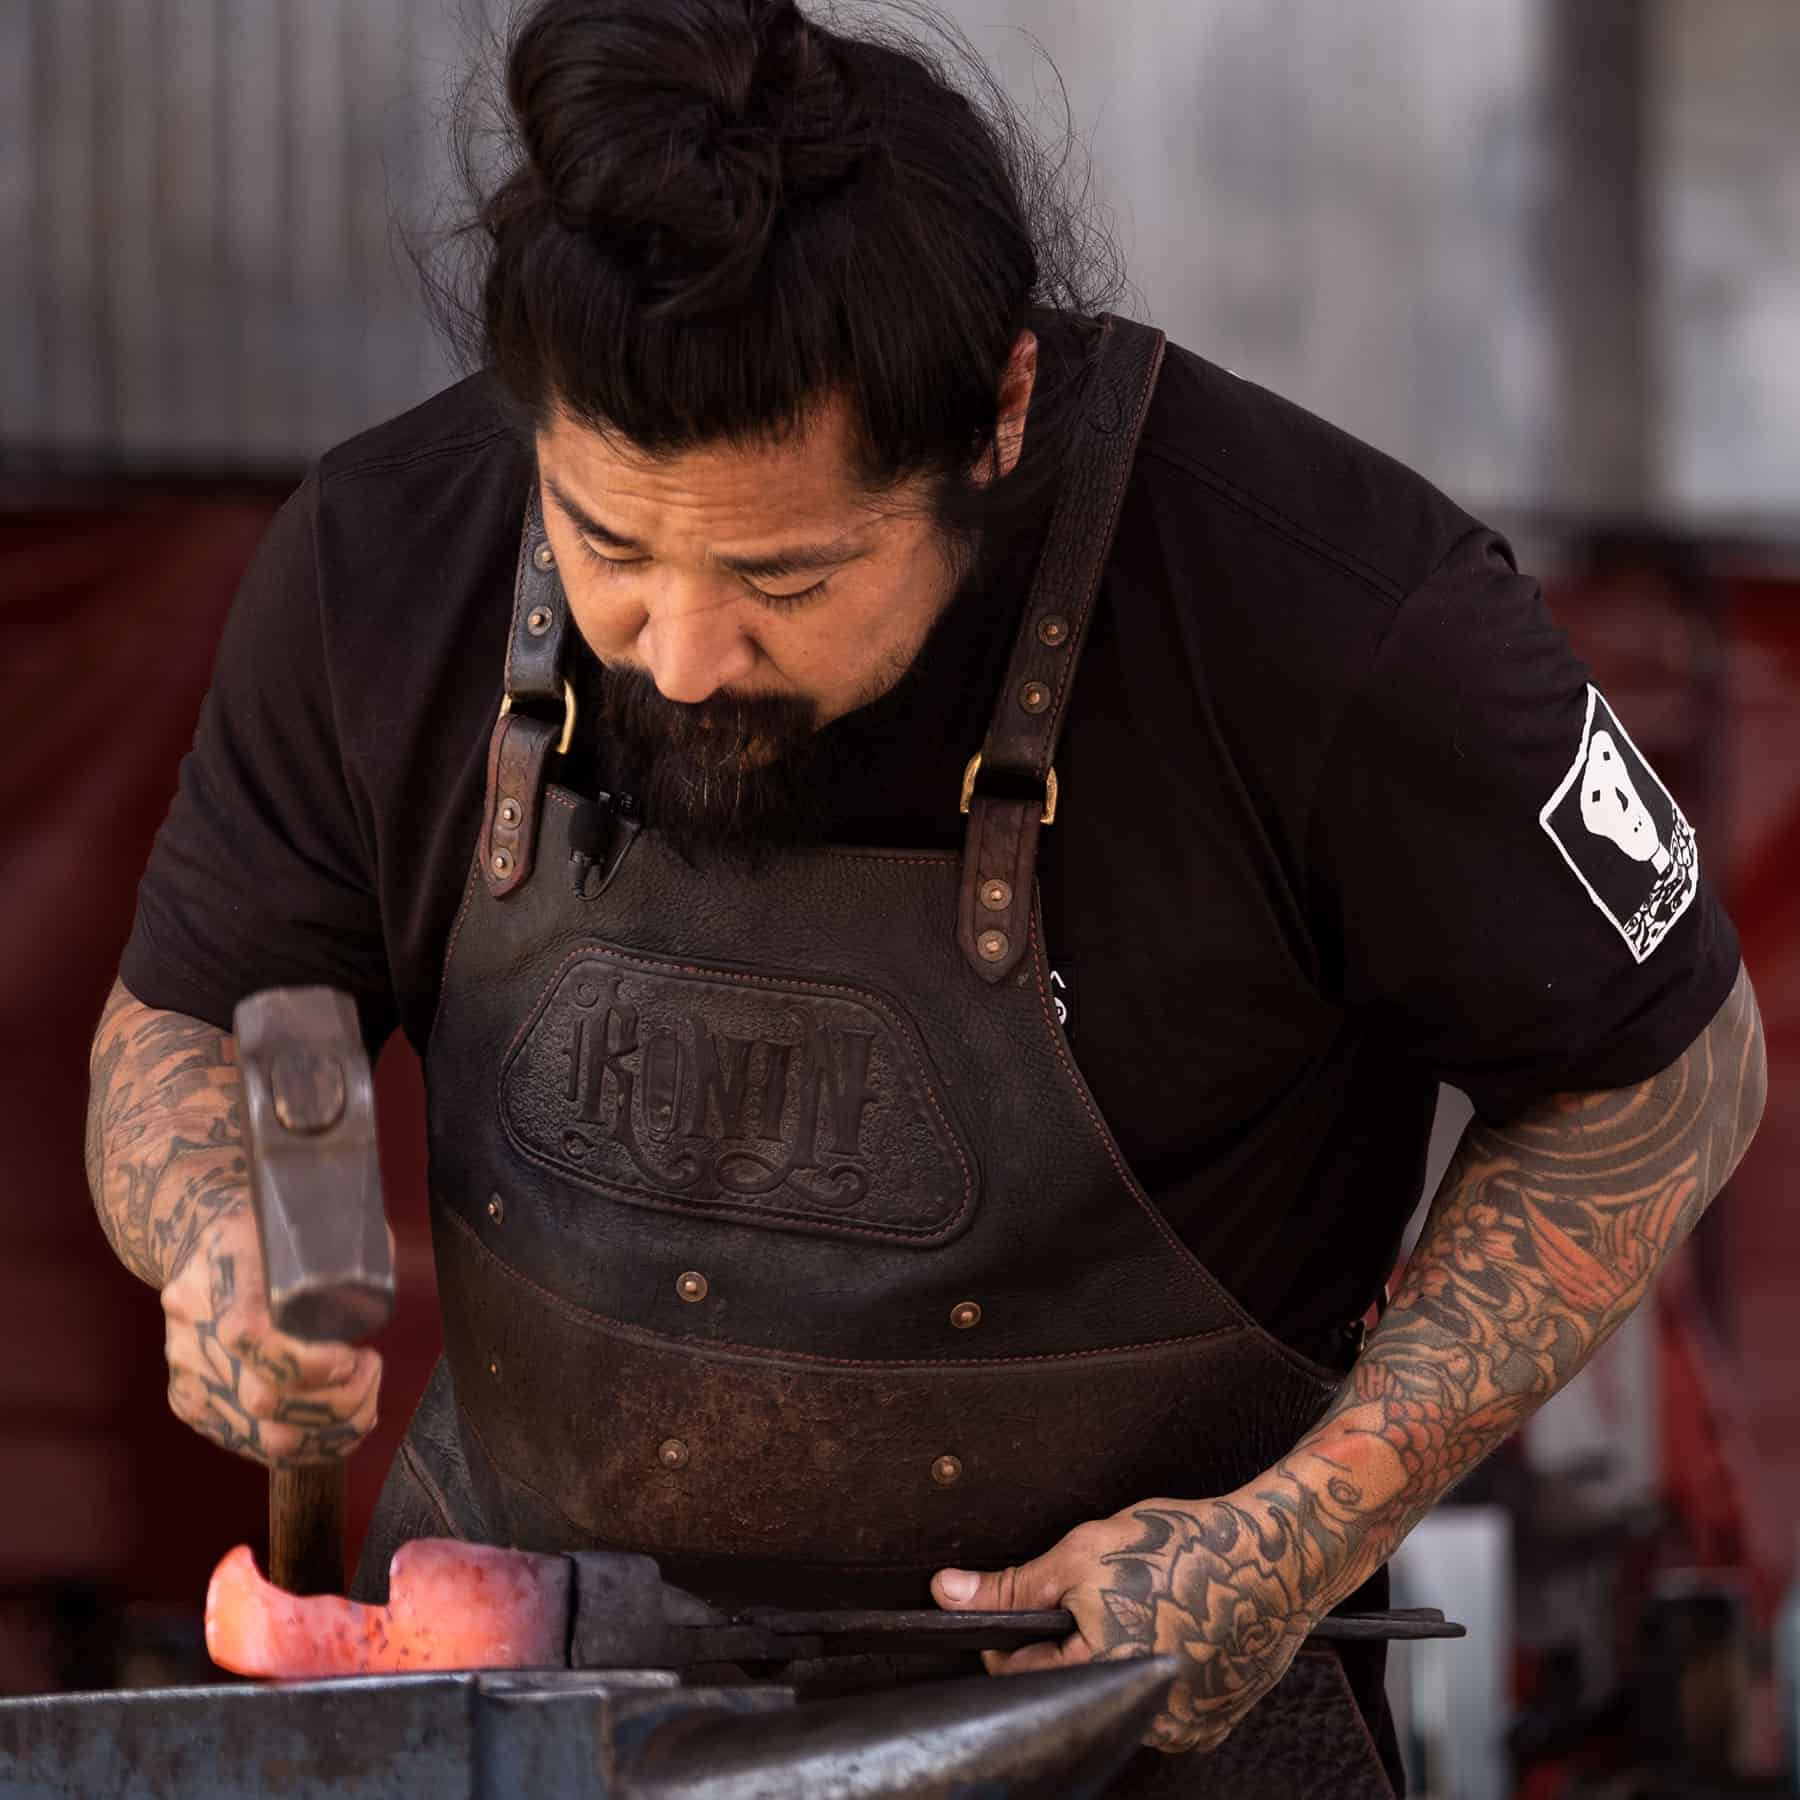 Neil Kamimura hammering a kitchen knife during the live forging session at Forged To Table 2022.